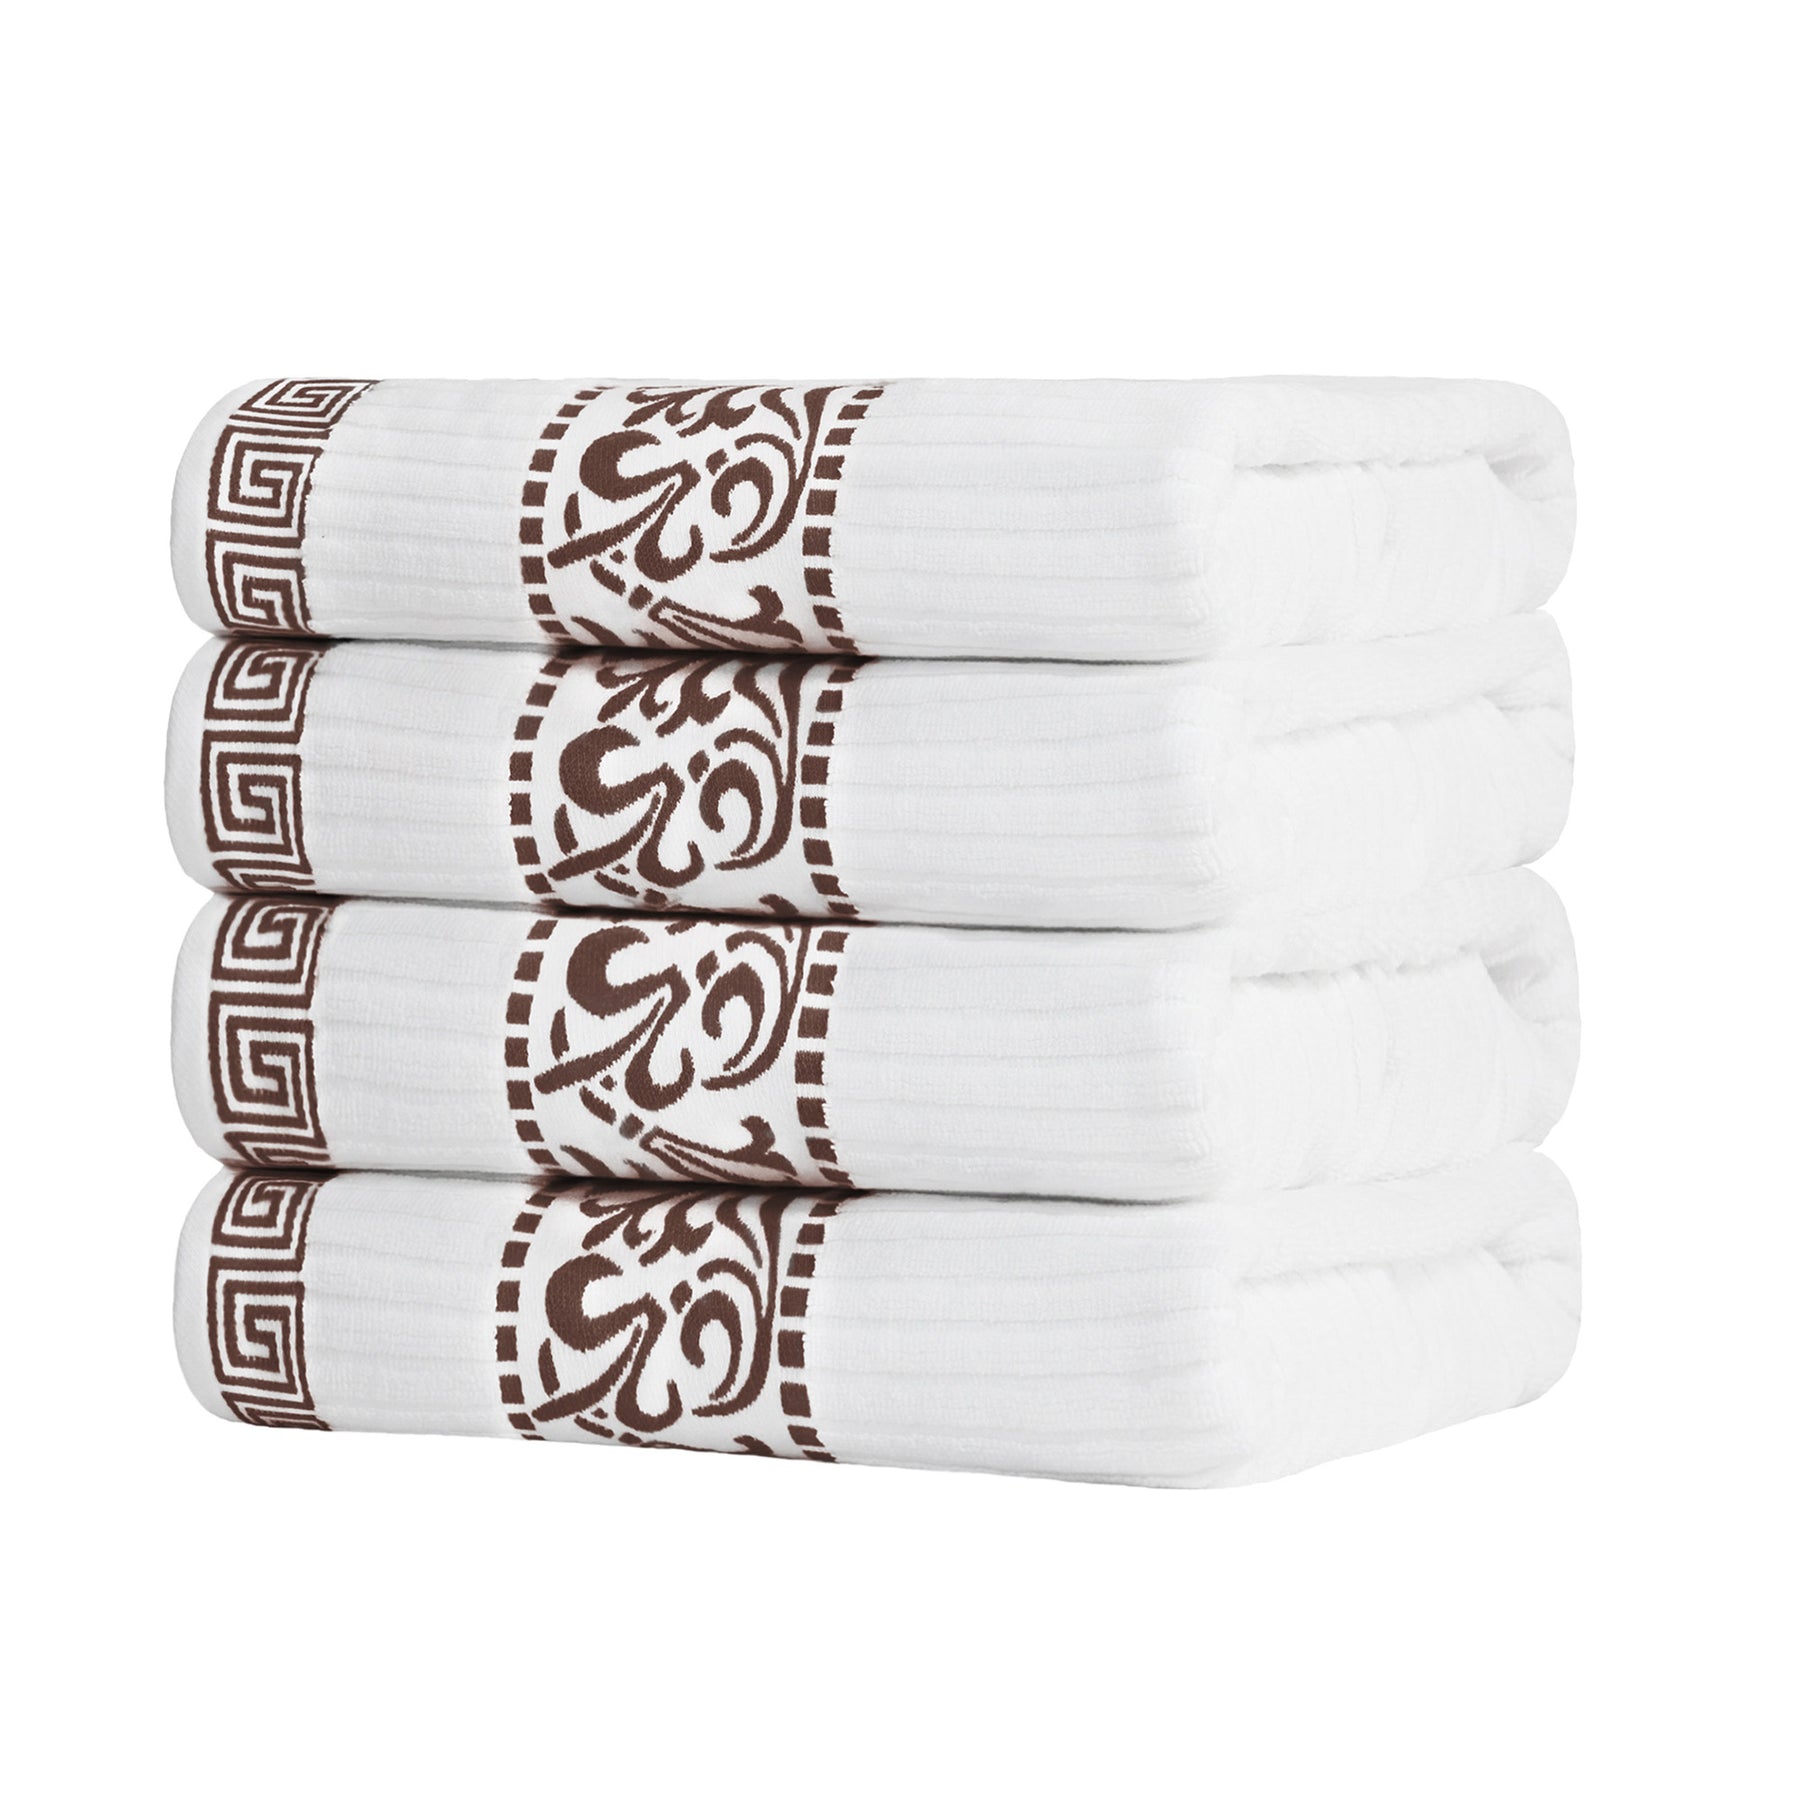 Superior Athens Cotton 4-Piece Bath Towel Set with Greek Scroll and Floral Pattern - White-Chocolate